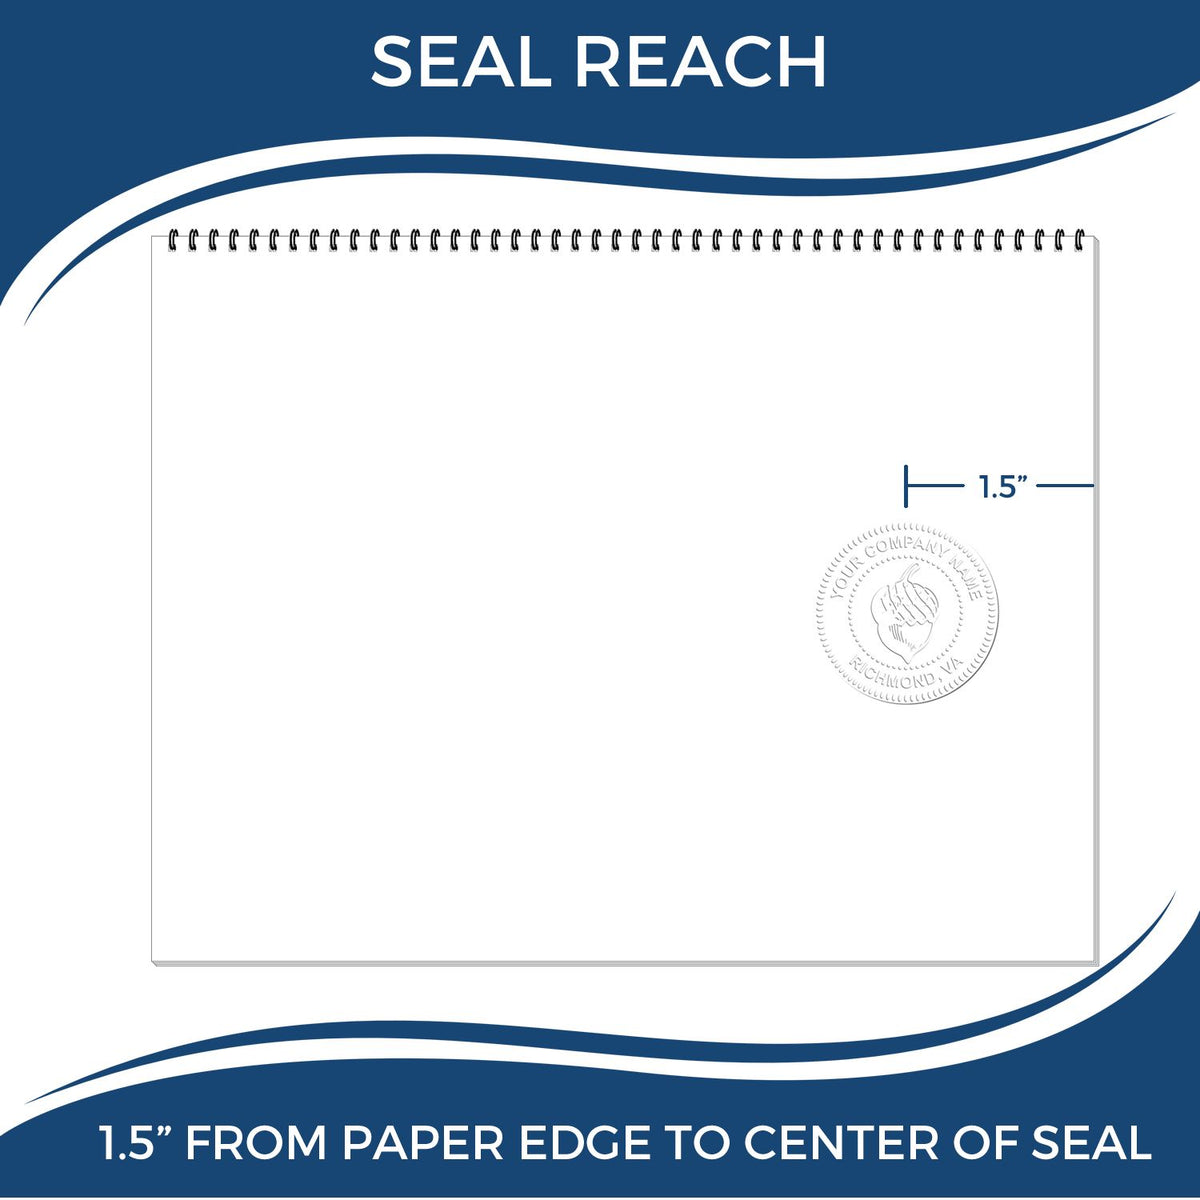 An infographic showing the seal reach which is represented by a ruler and a miniature seal image of the Handheld Delaware Architect Seal Embosser